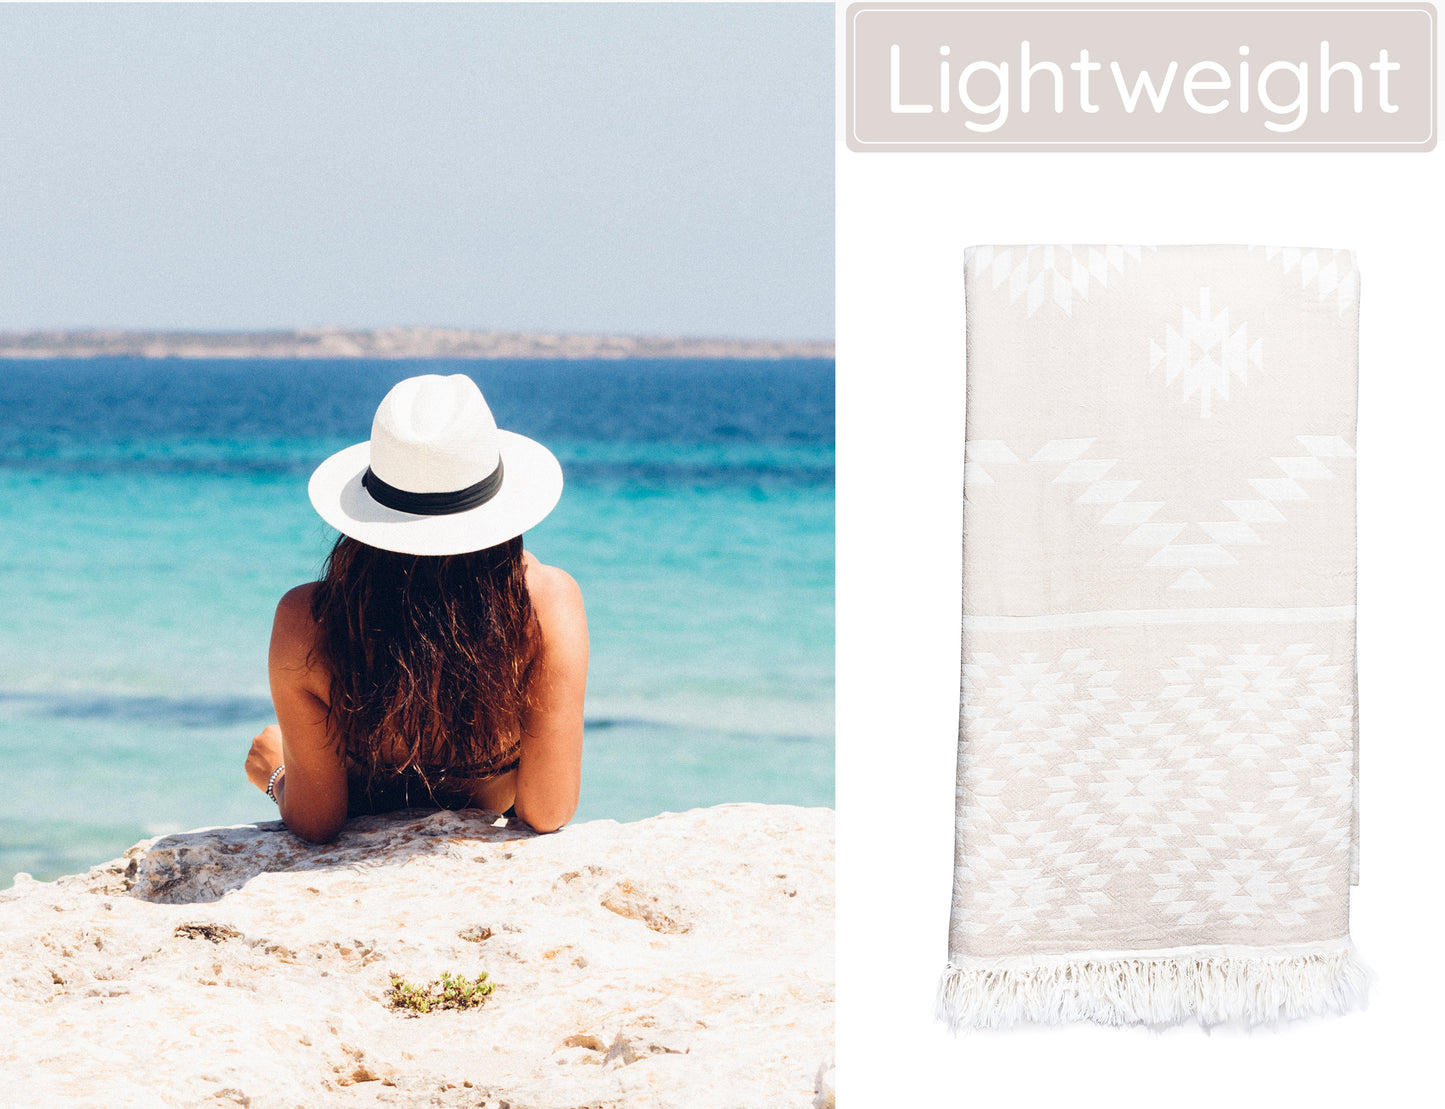 Beige Sand Turkish Beach Towel (35”x67”)  Lightweight, Quick drying and Sand Free Can be Used as Beach Blanket 100% Cotton Vintage Design